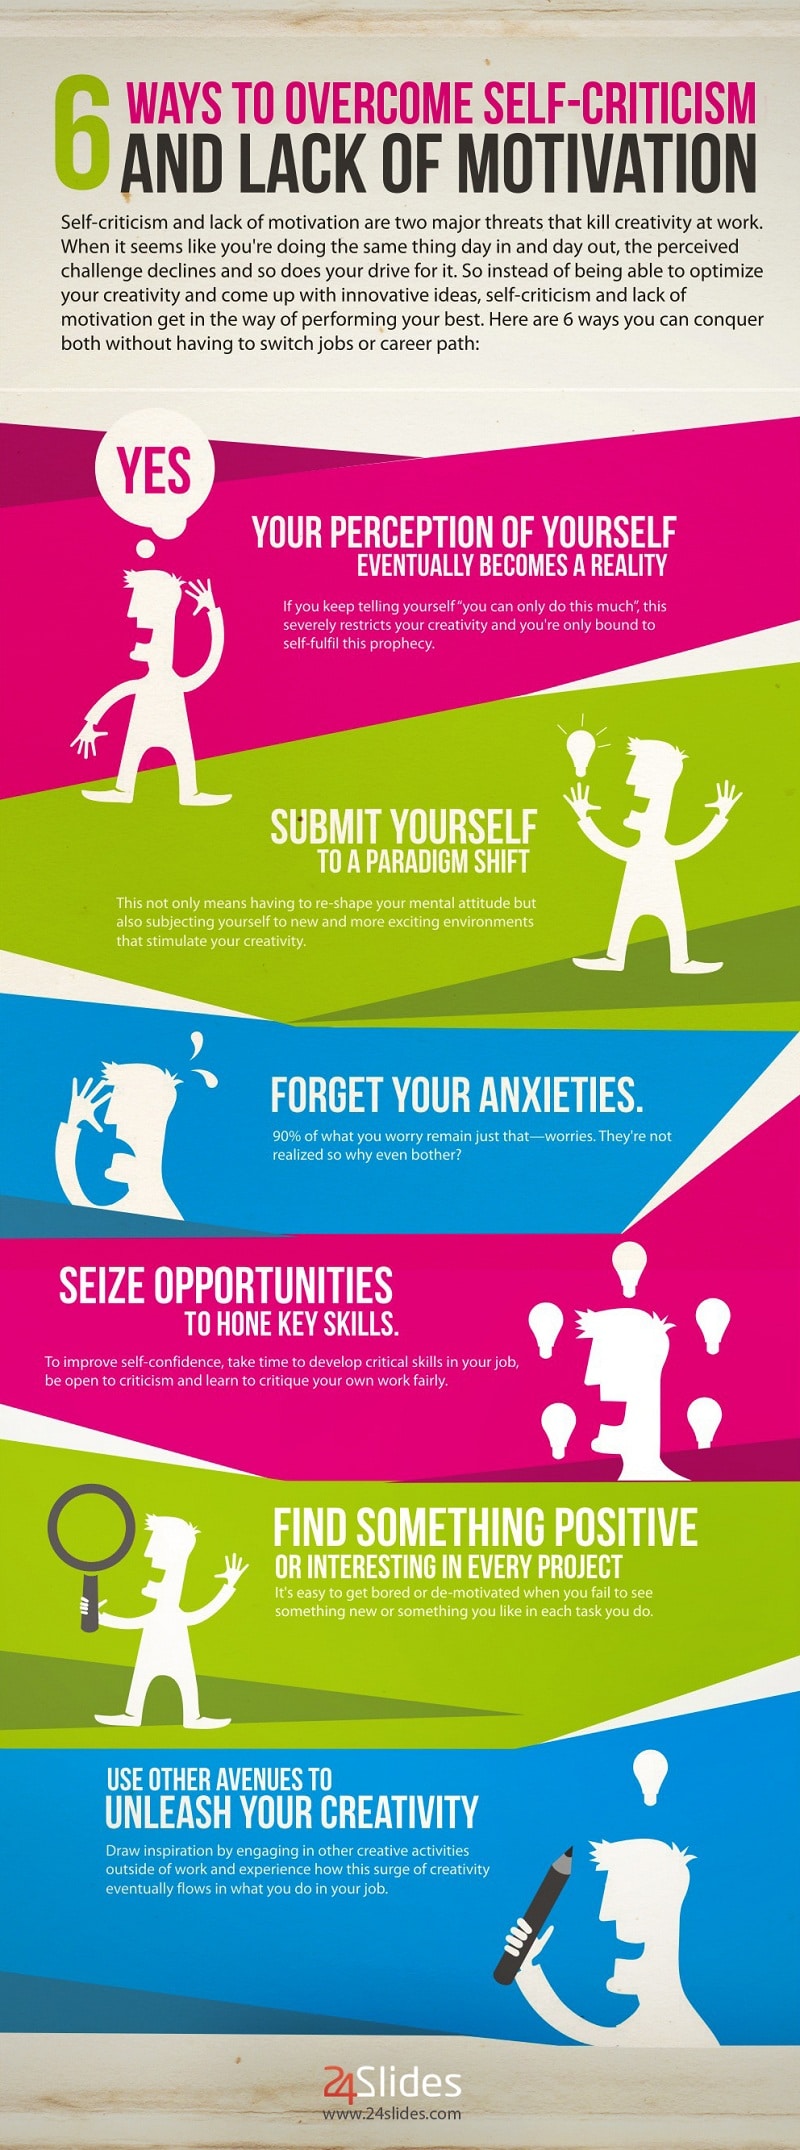 Overcoming Self-Criticism Guide Infographic